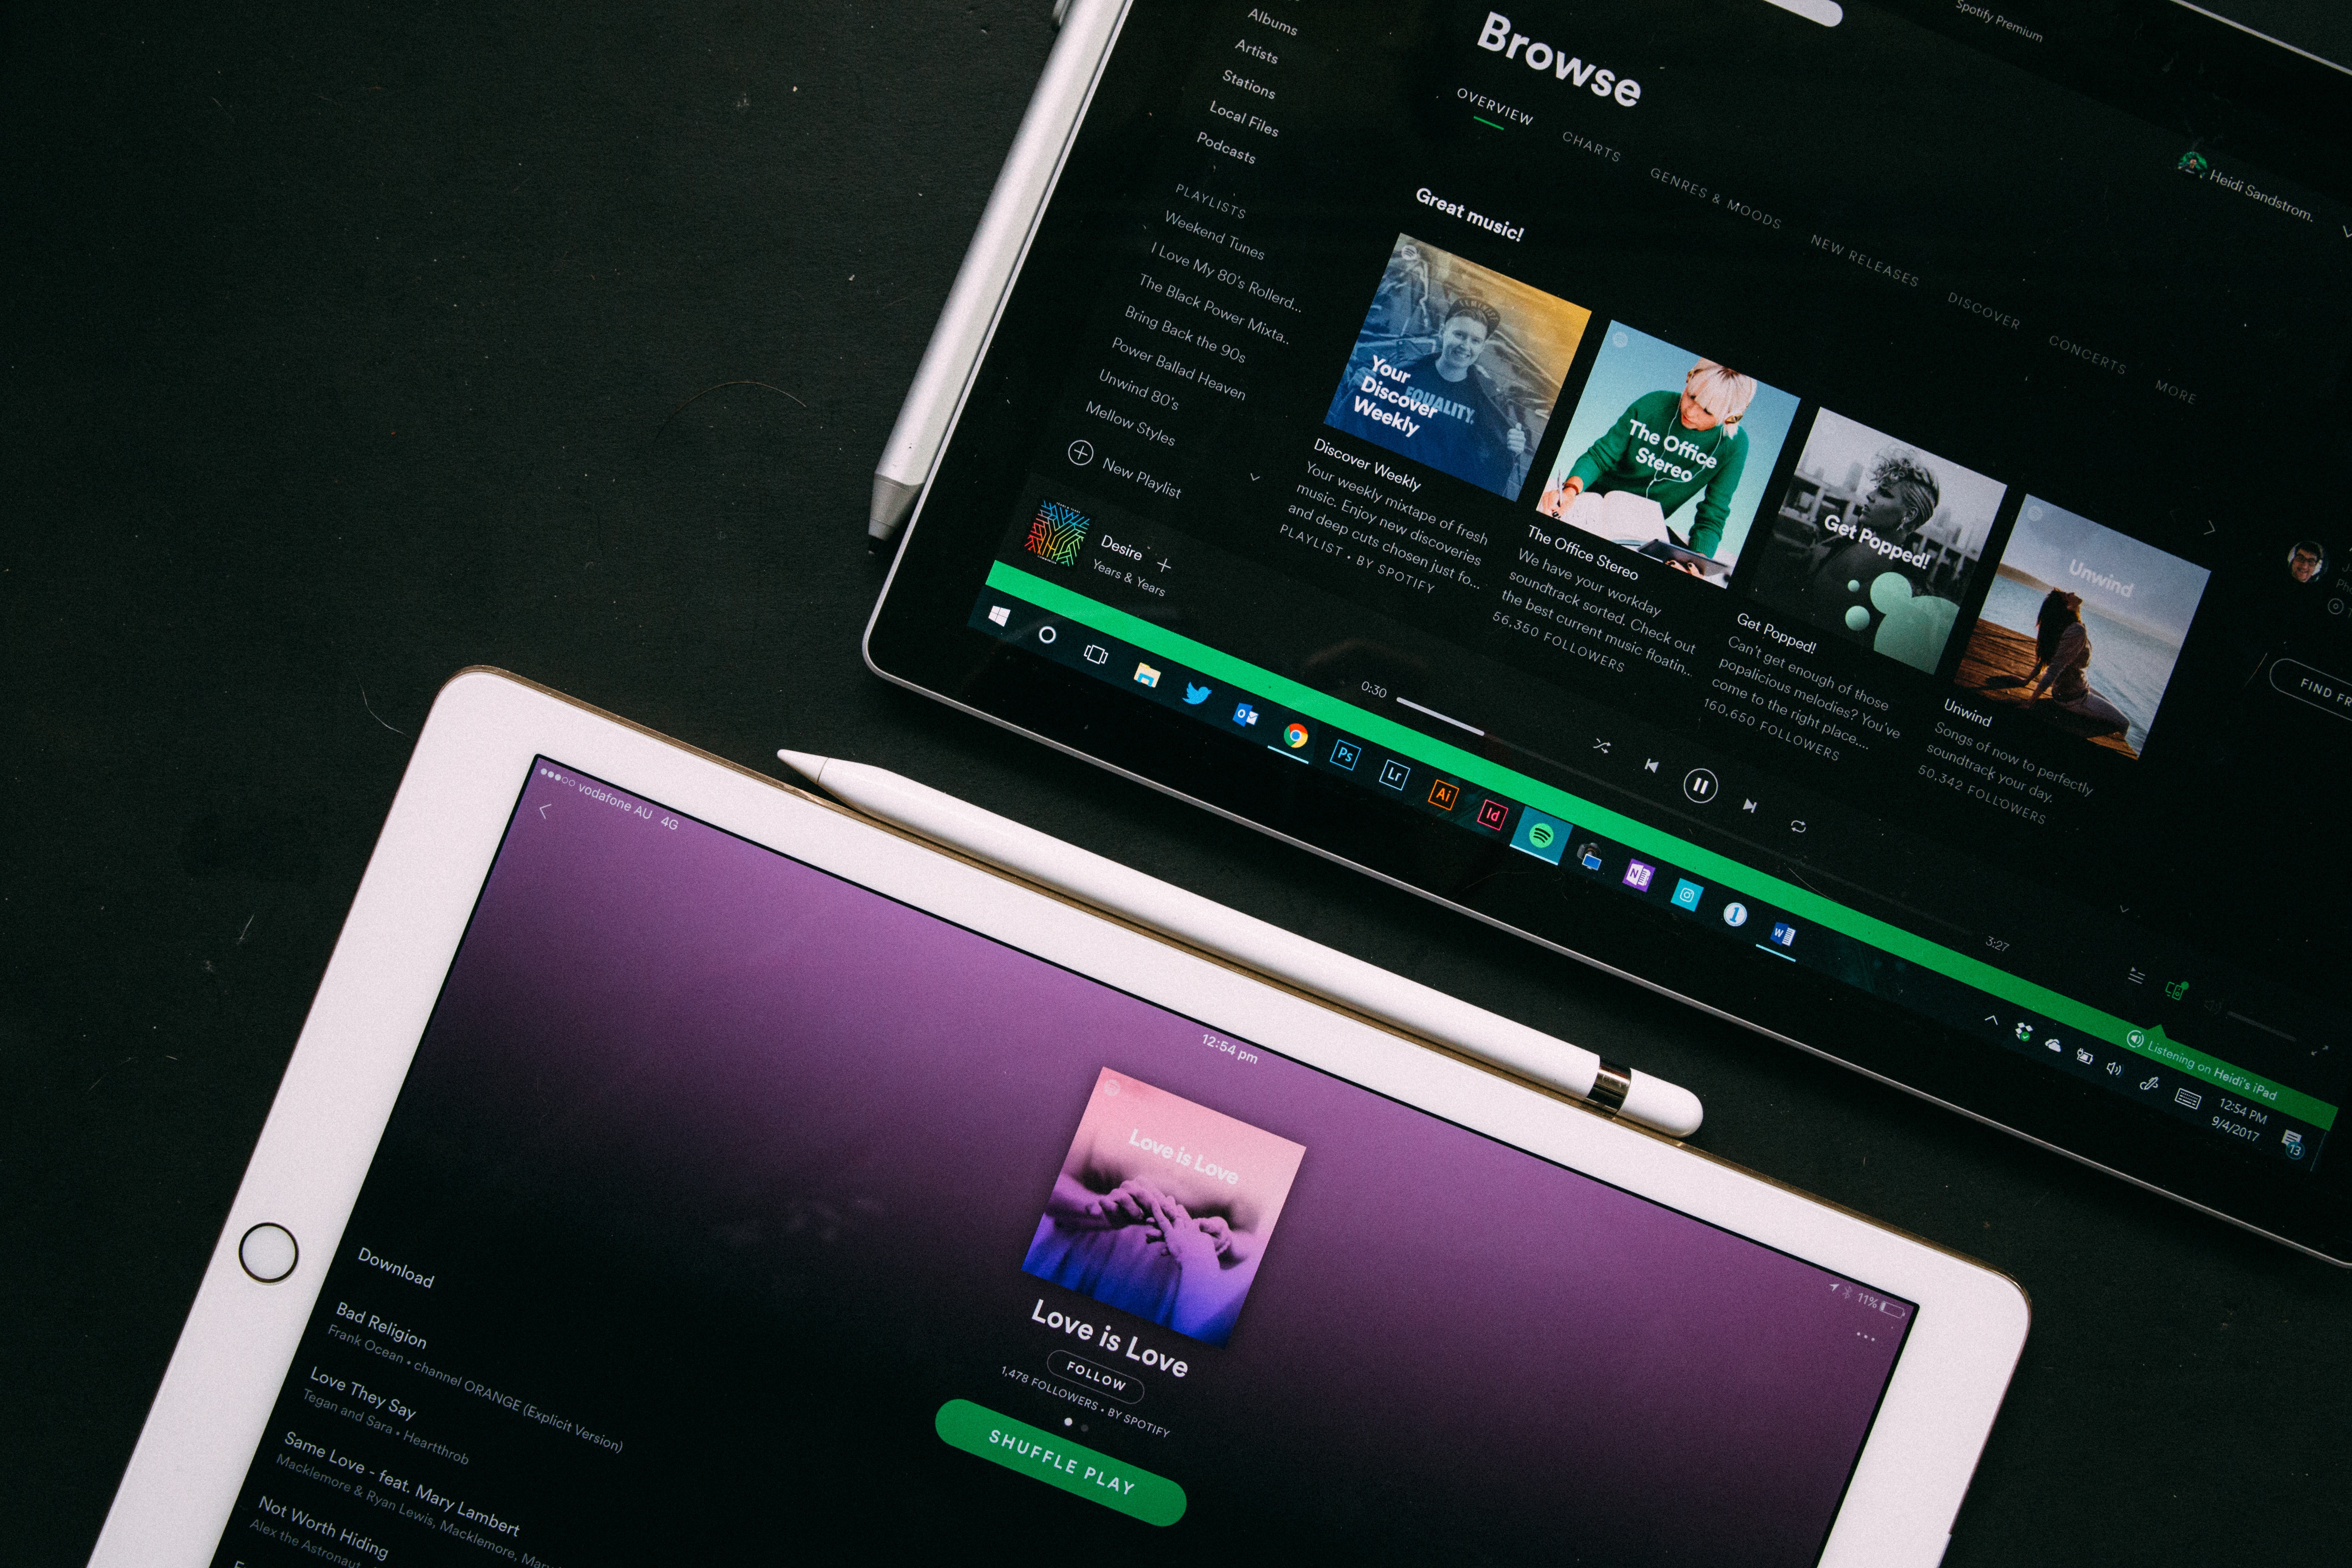 Artists can now ask to be placed on a Spotify playlist